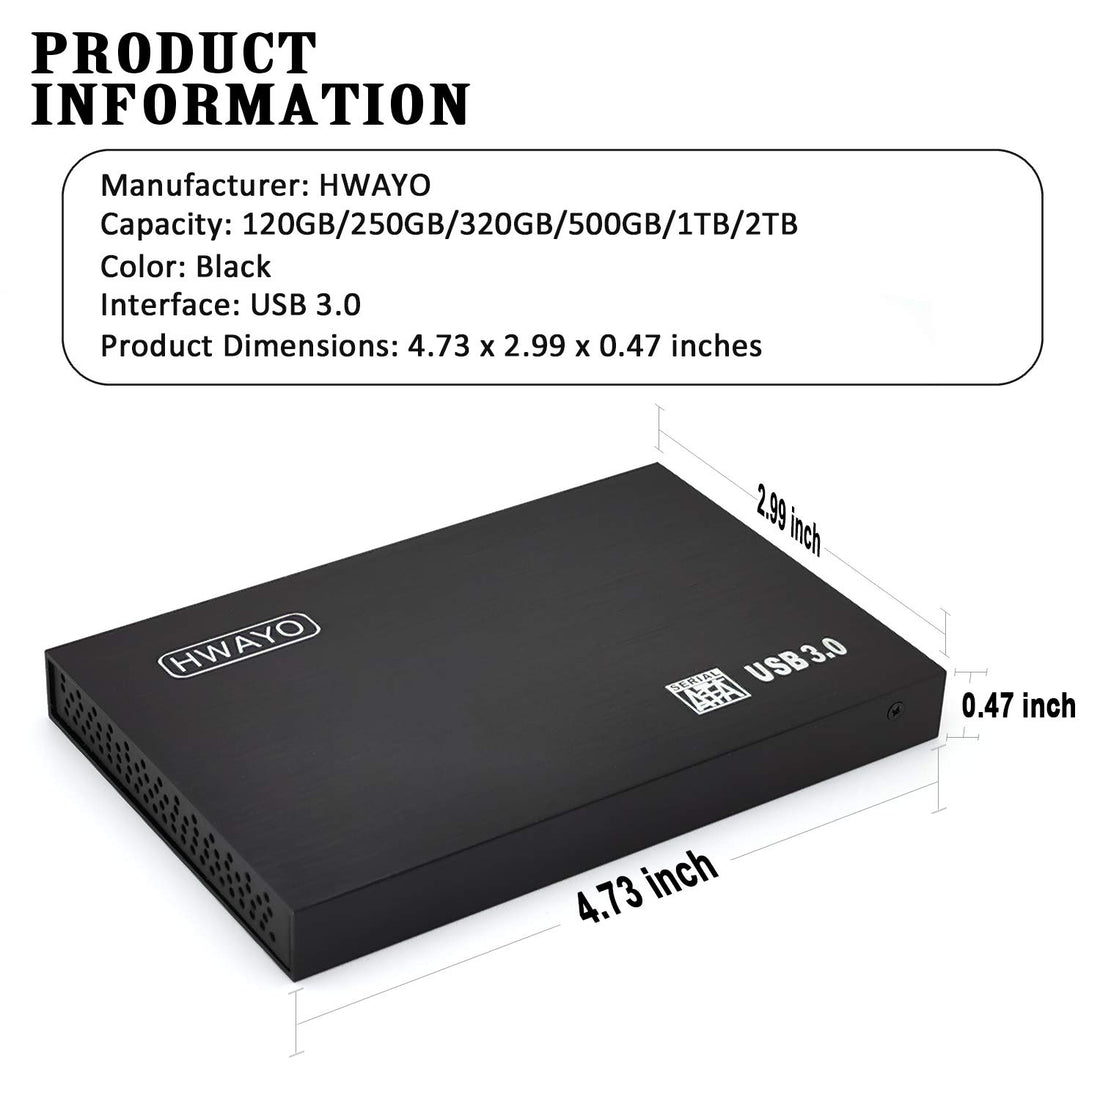 HWAYO 2.5'' 250GB Ultra Slim Portable External Hard Drive USB3.0 HDD Storage for PC, Laptop, Xbox One Consle